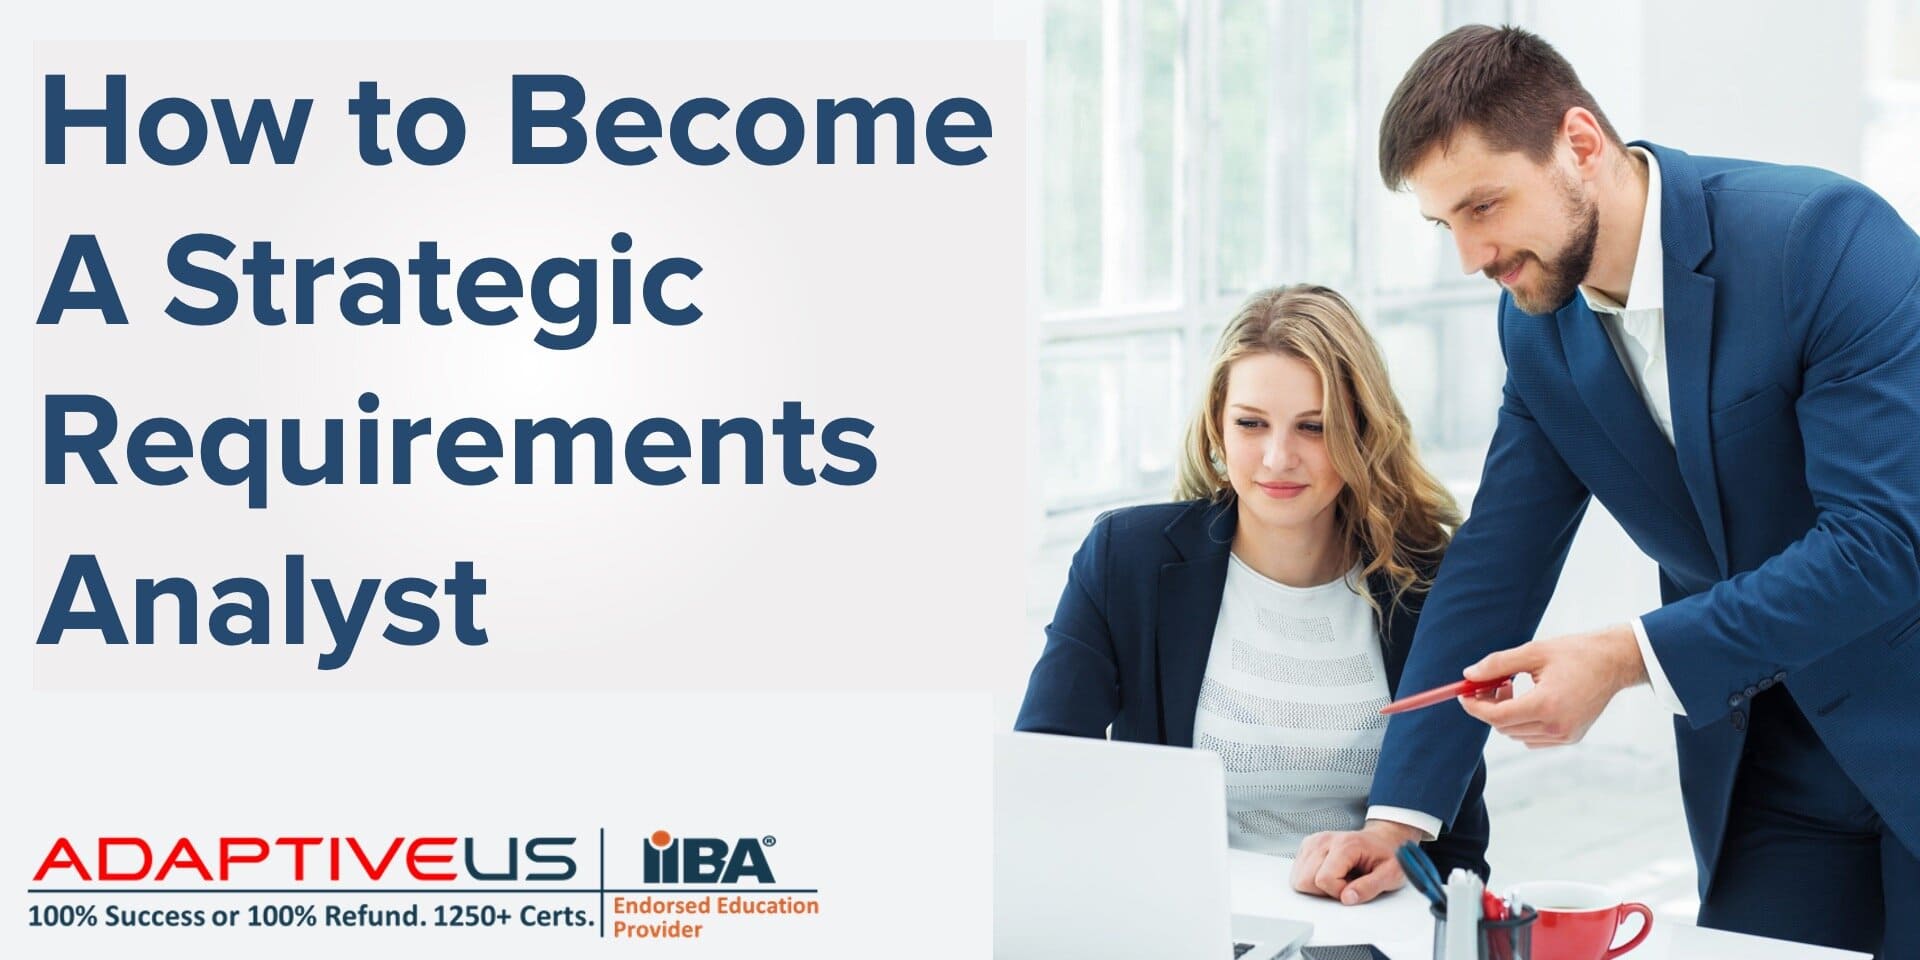 How to Become a Strategic Requirements Analyst